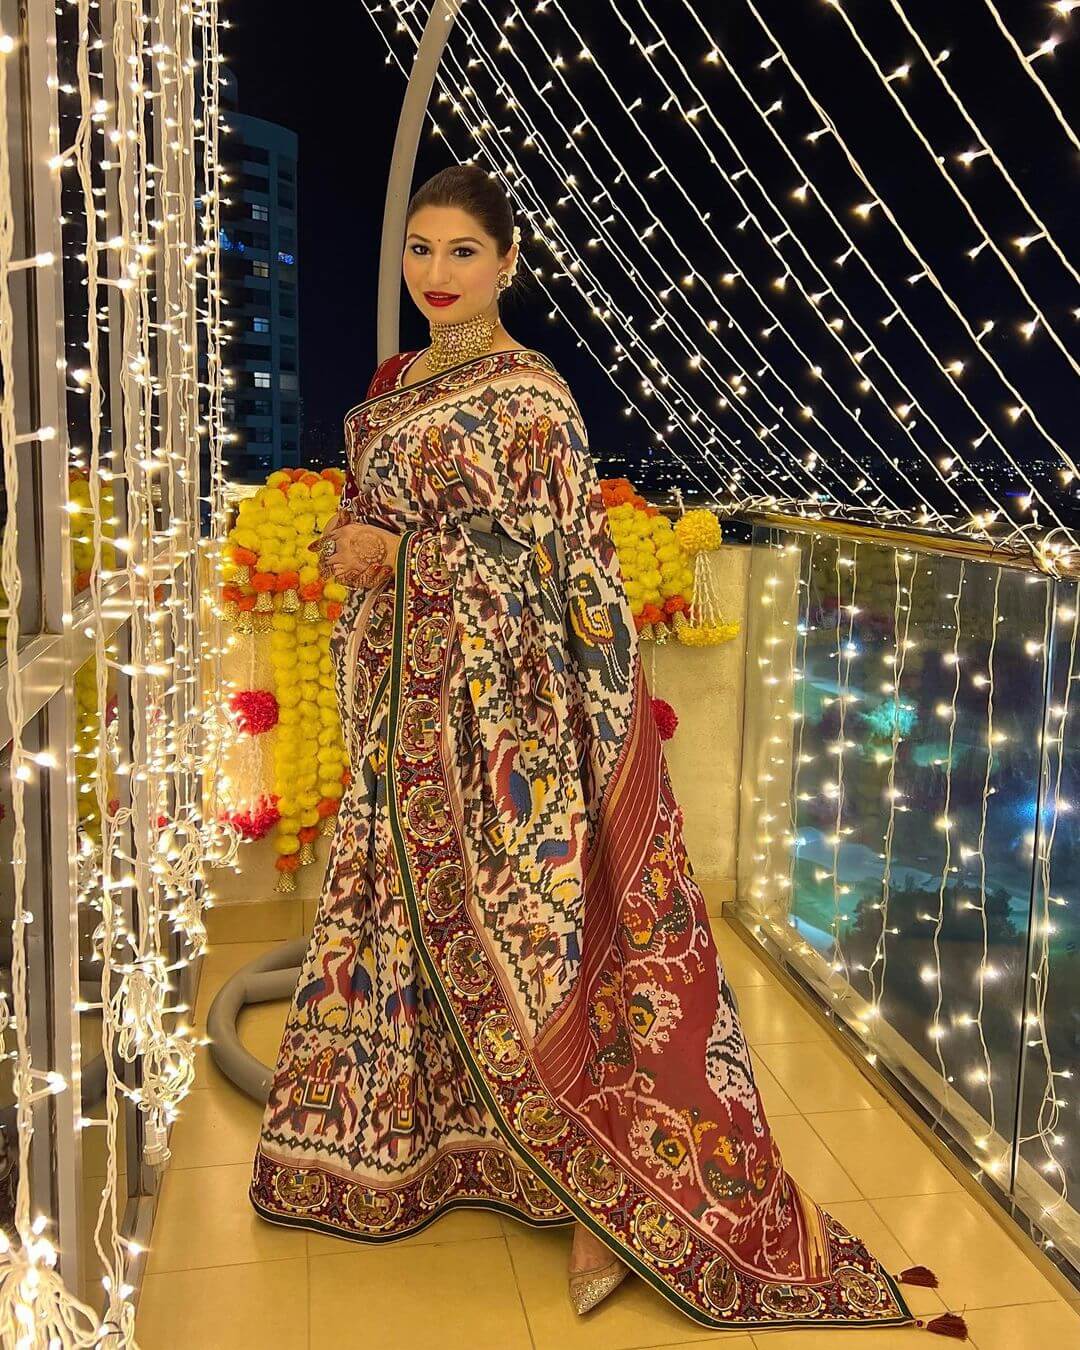 Printed Saree for a nice Evening Party